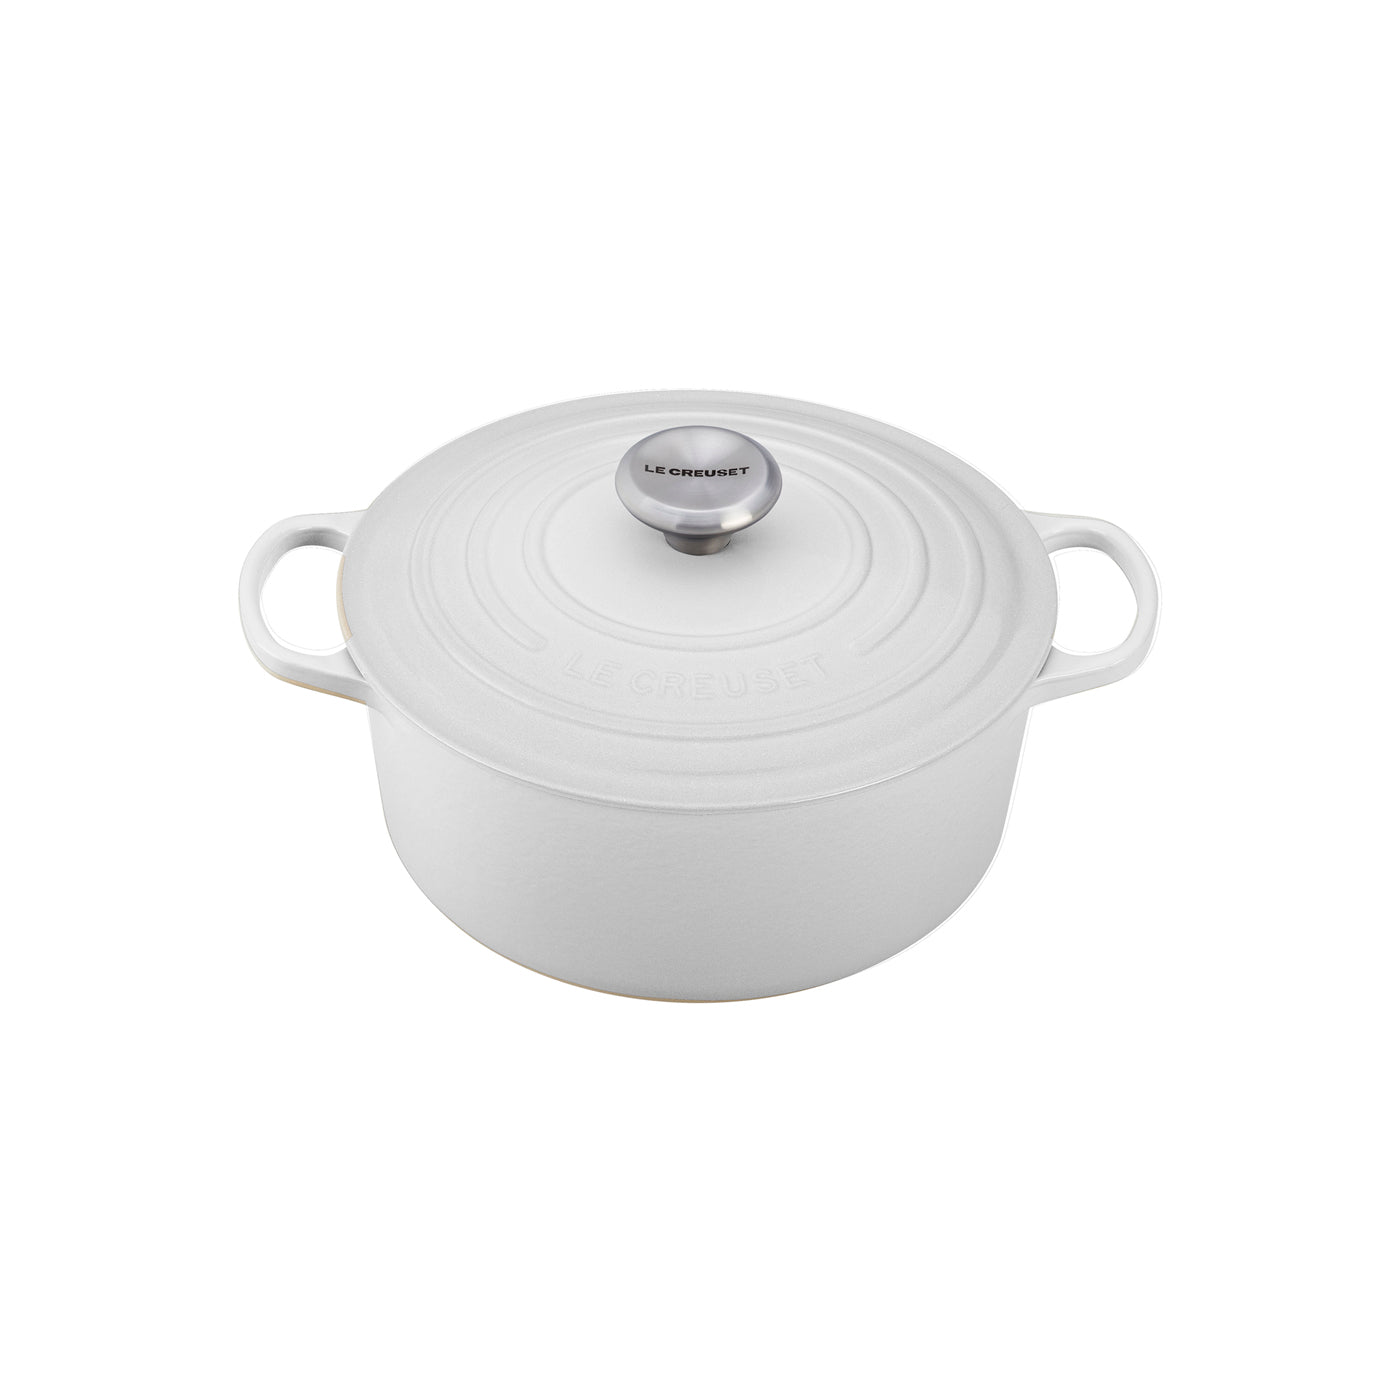 porter At opdage arrestordre Le Creuset 5 1/2 Qt. Signature Round French Oven w/Stainless Steel Kno –  Chef's Arsenal